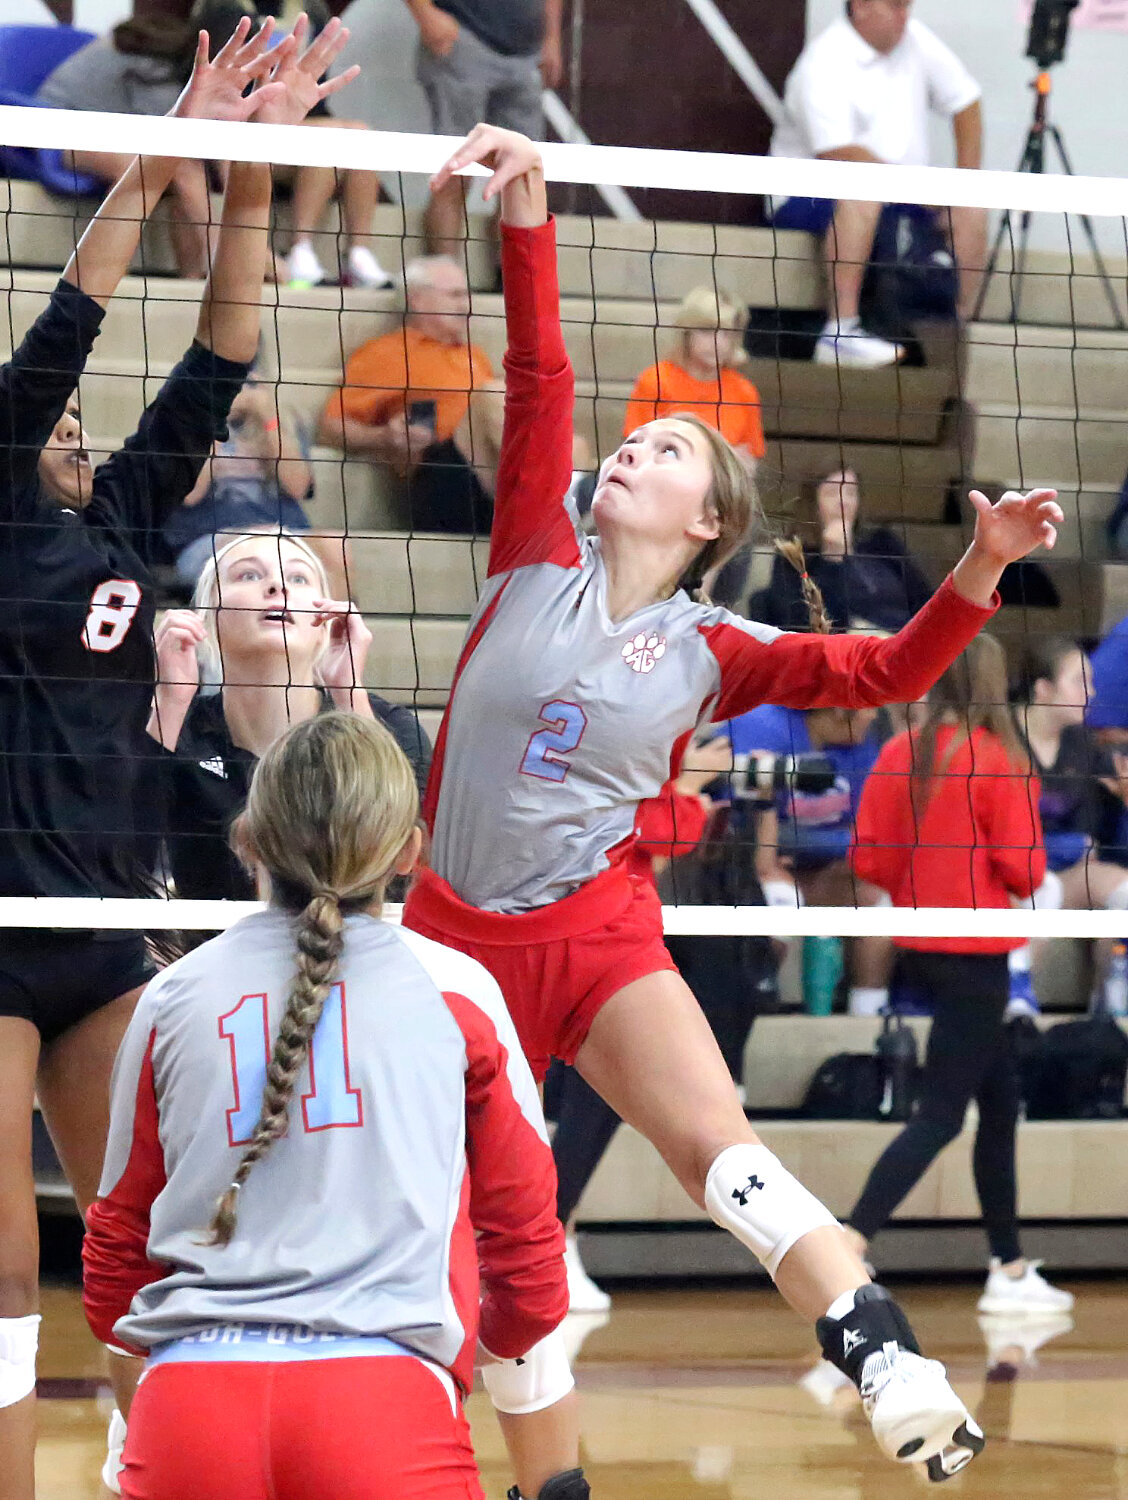 Lady Panther Kalli Trimble in action at the net.